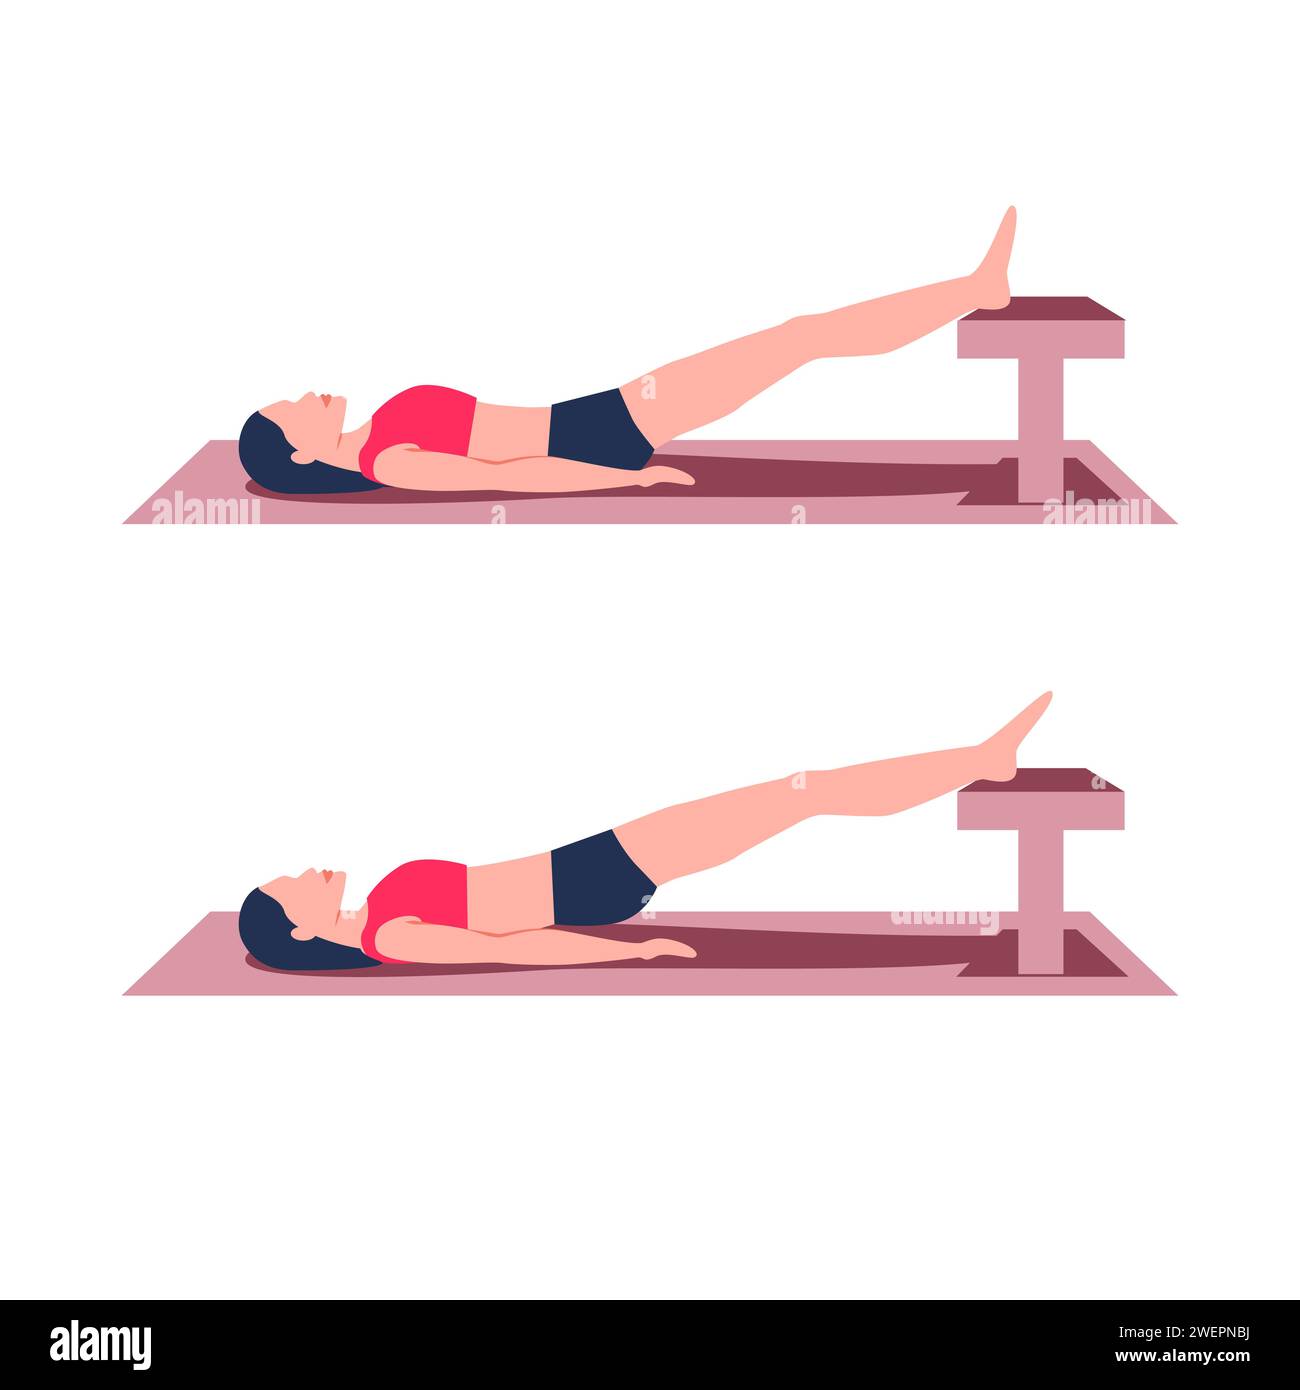 Pelvic lift feet on bench exercise educational scheme infographic. Woman makes hip thrust for strength gluteal and hamstrings muscles. Lower back pain relief workout. Vector illustration. Stock Vector